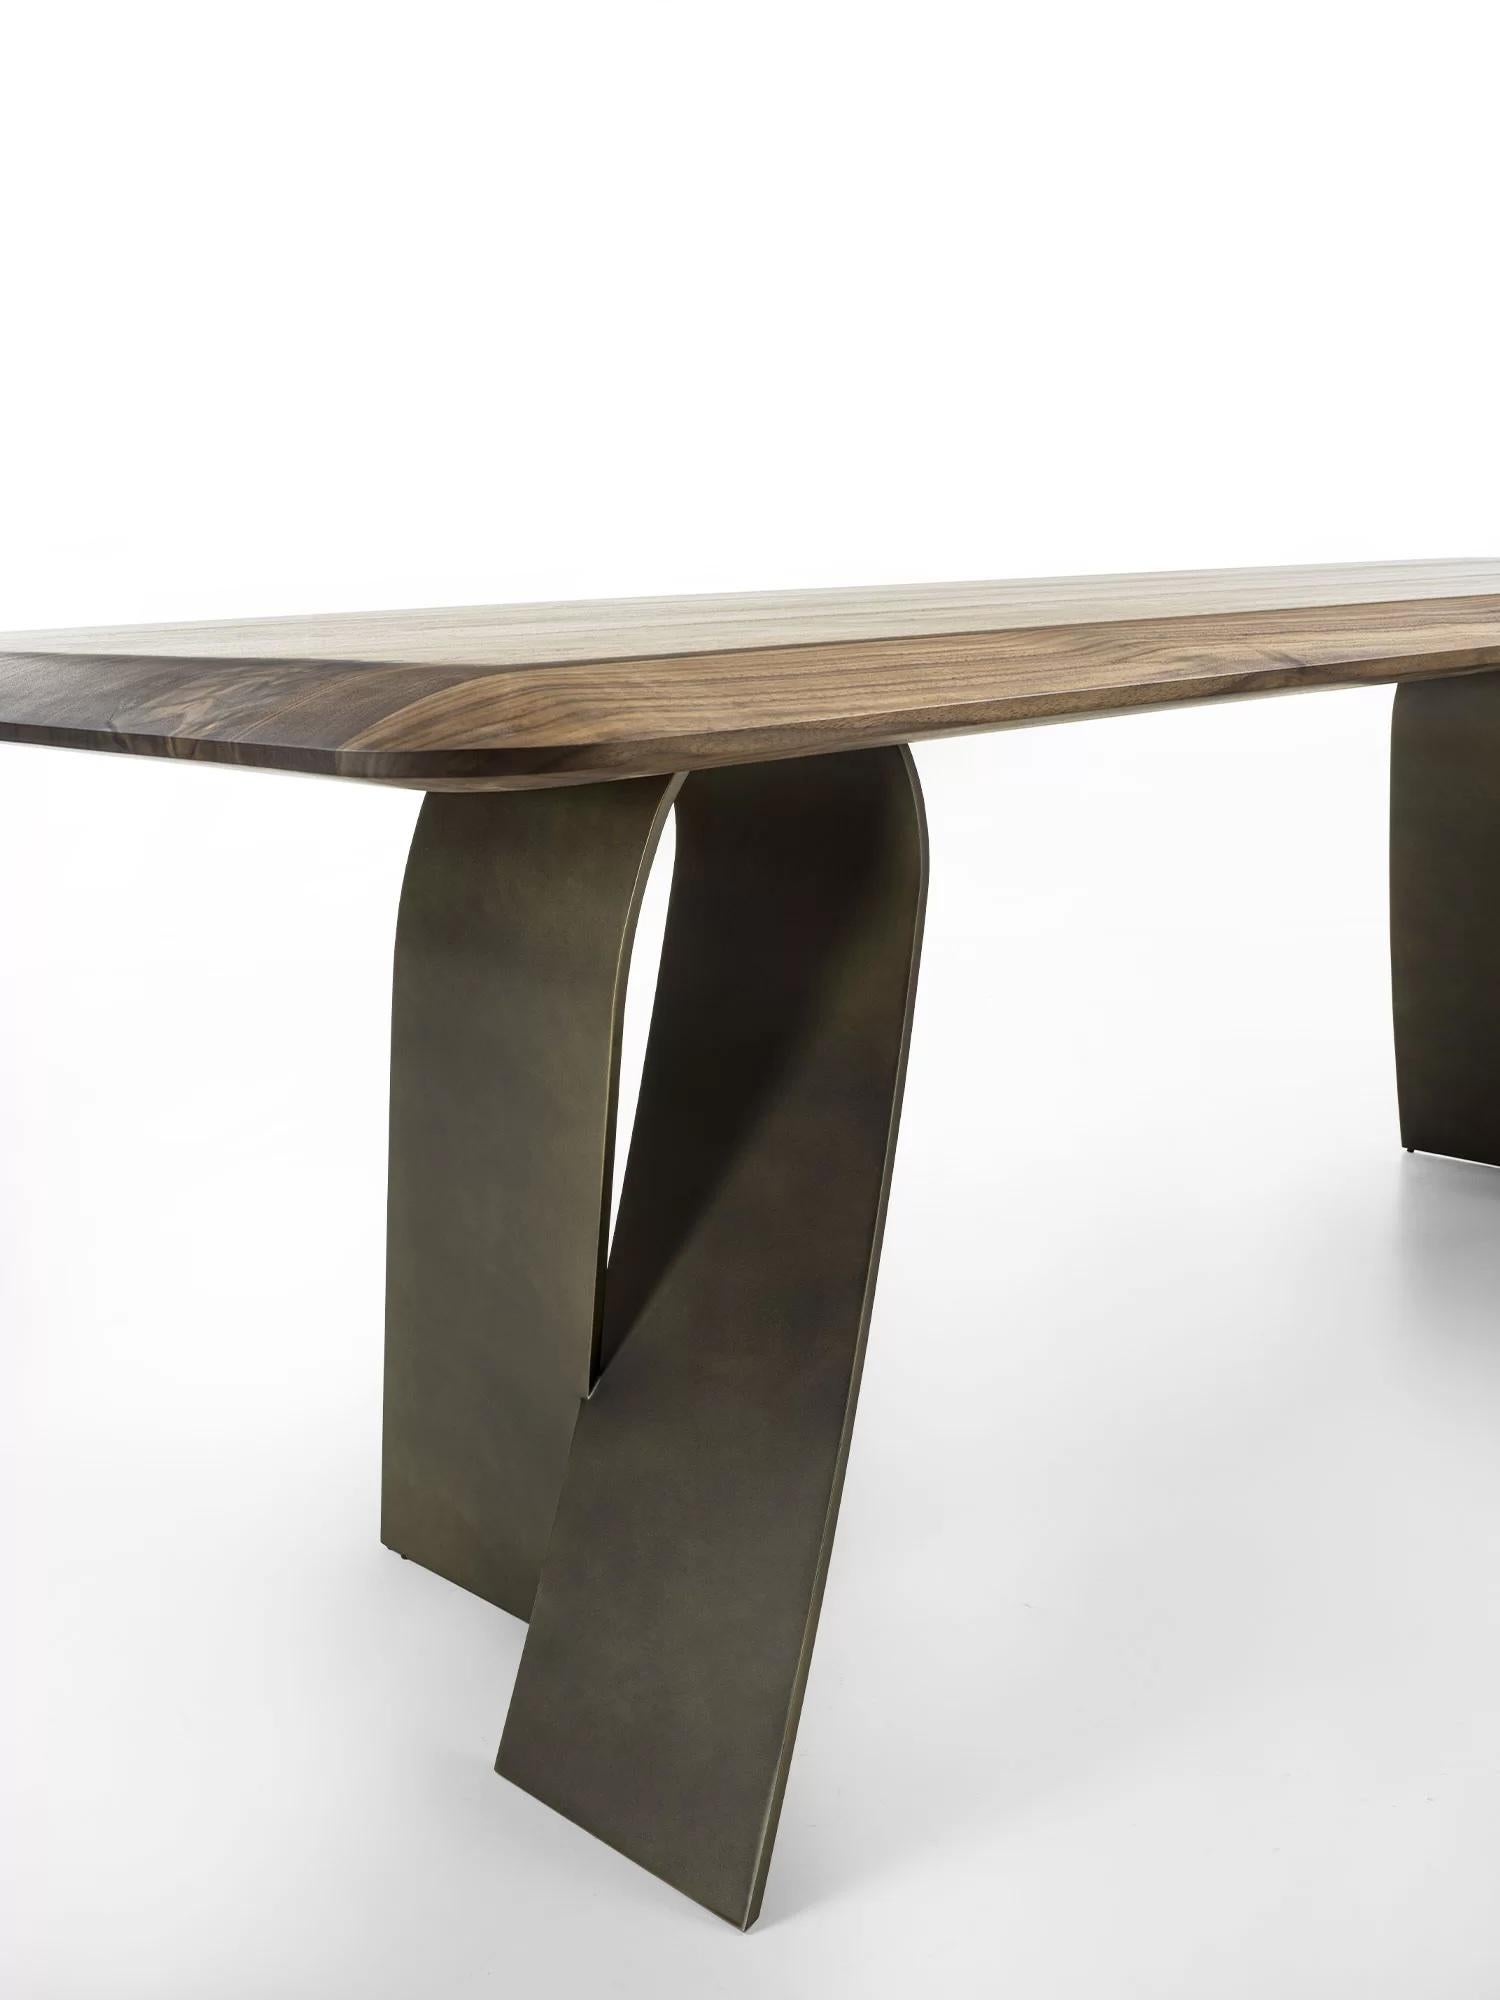 Contemporary Nastro Wood & Iron Dining Table, Designed by Carlesi Tonelli, Made in Italy For Sale